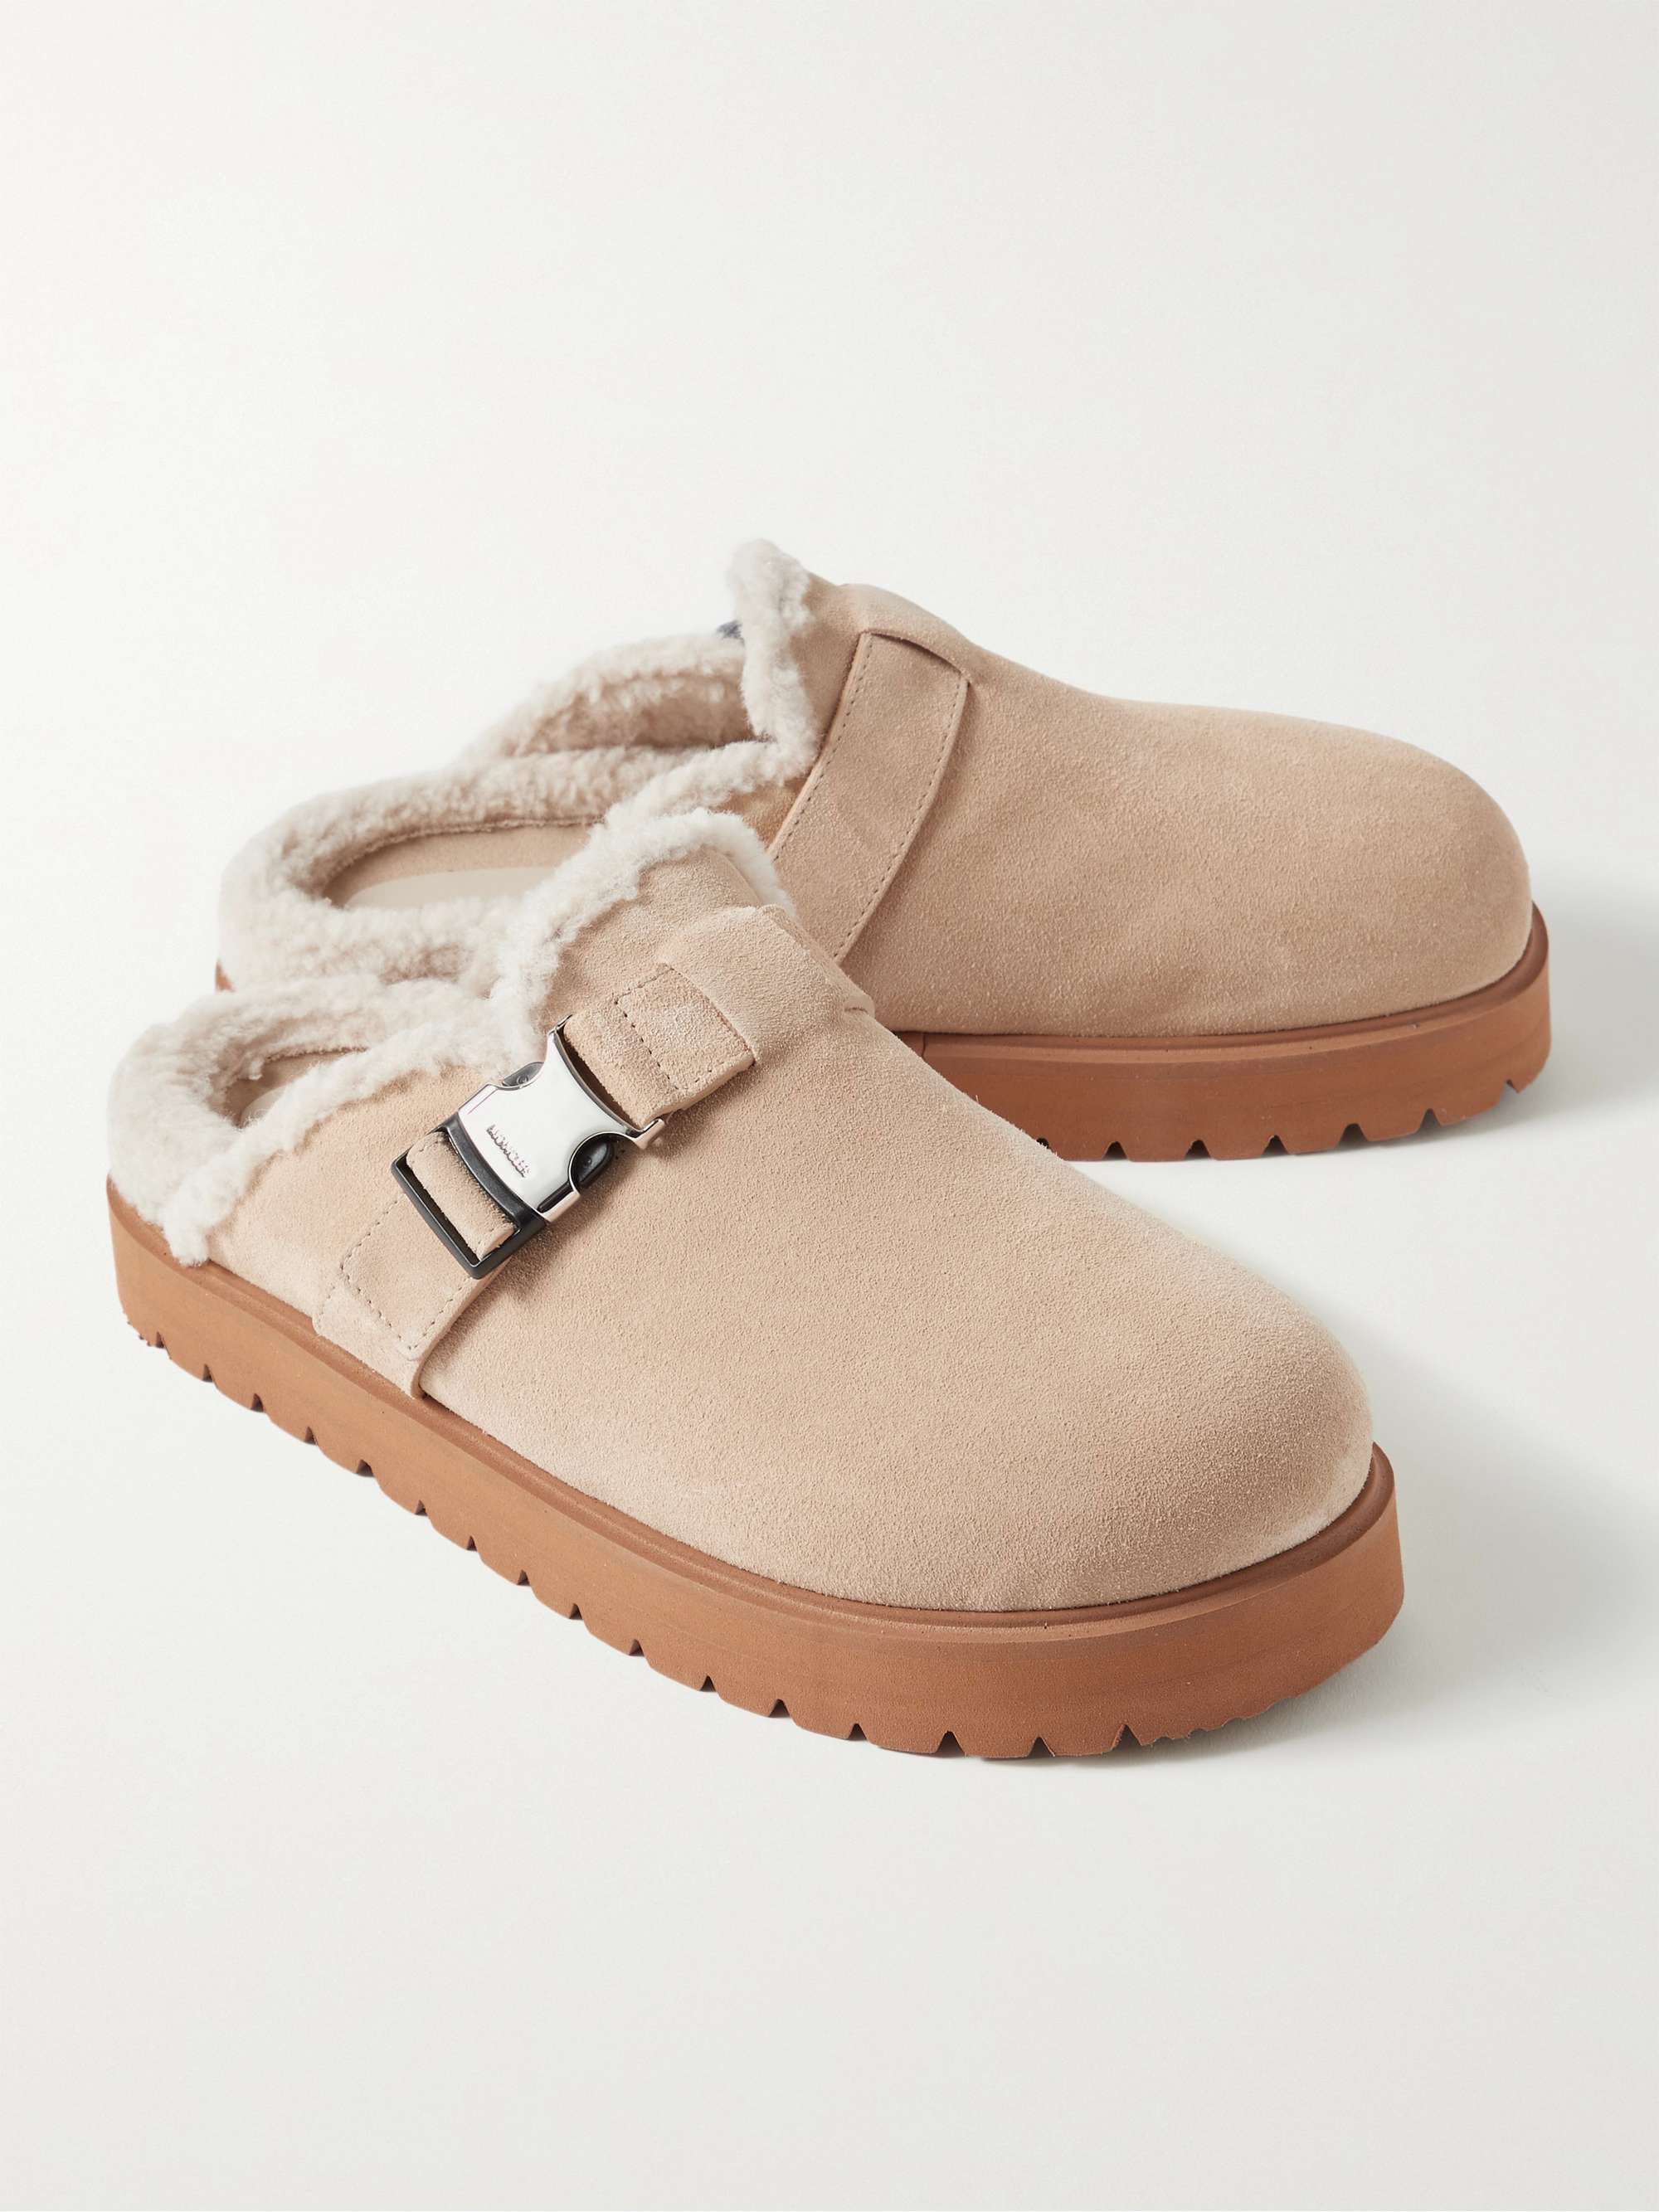 Mon Faux Shearling-Lined Suede Clogs